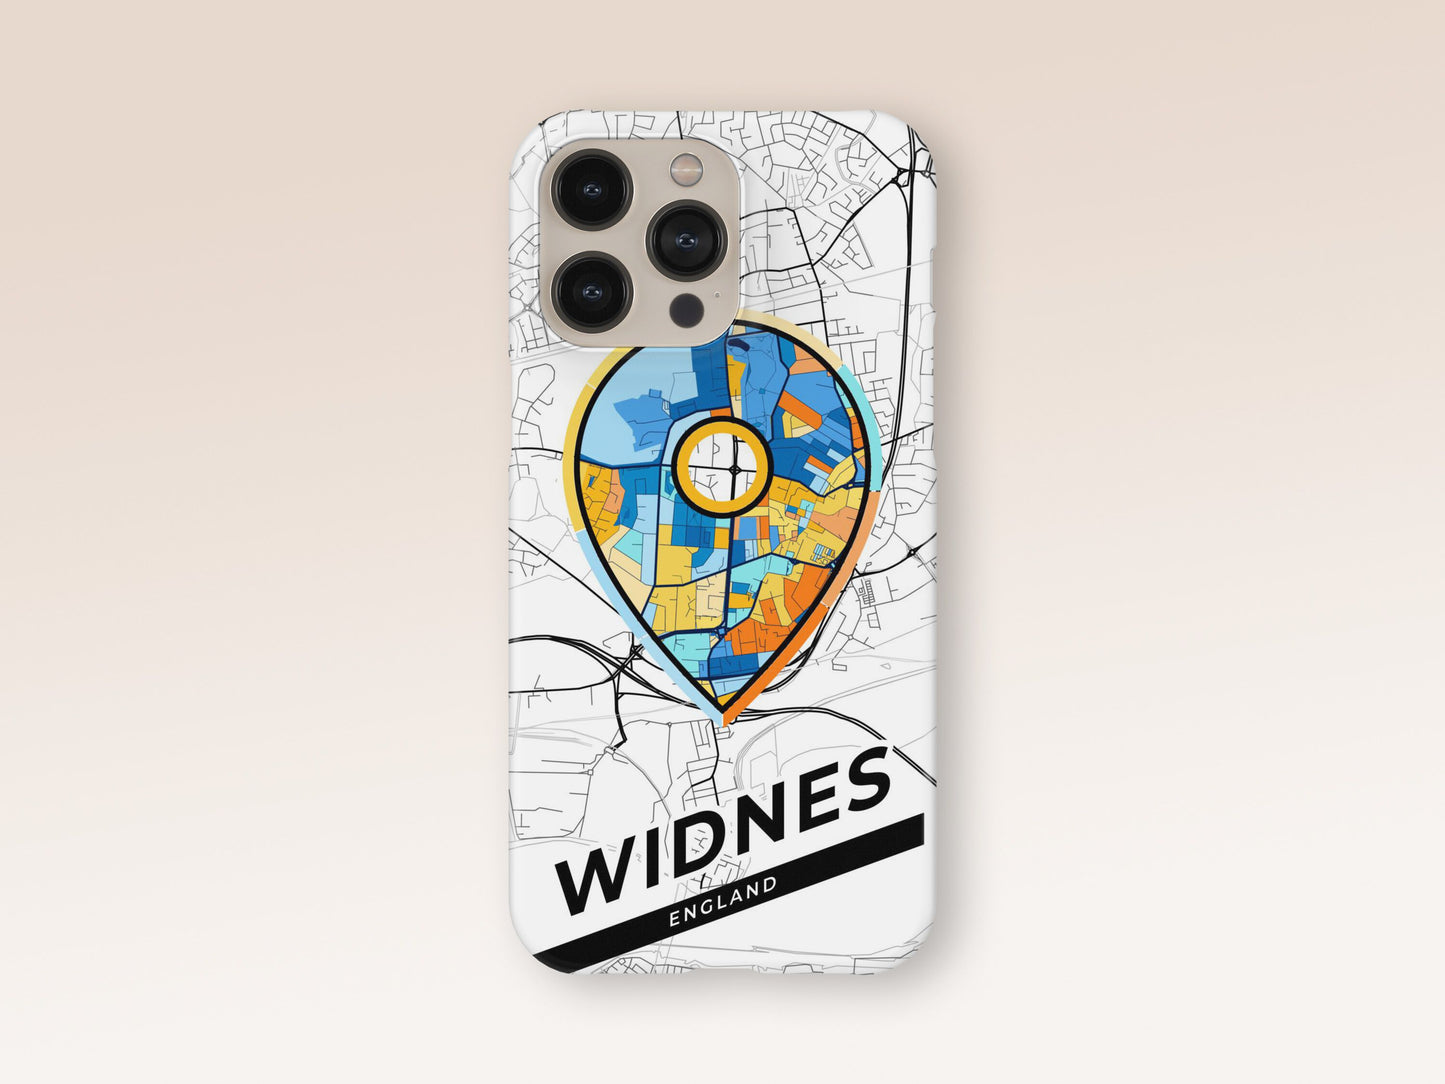 Widnes England slim phone case with colorful icon 1